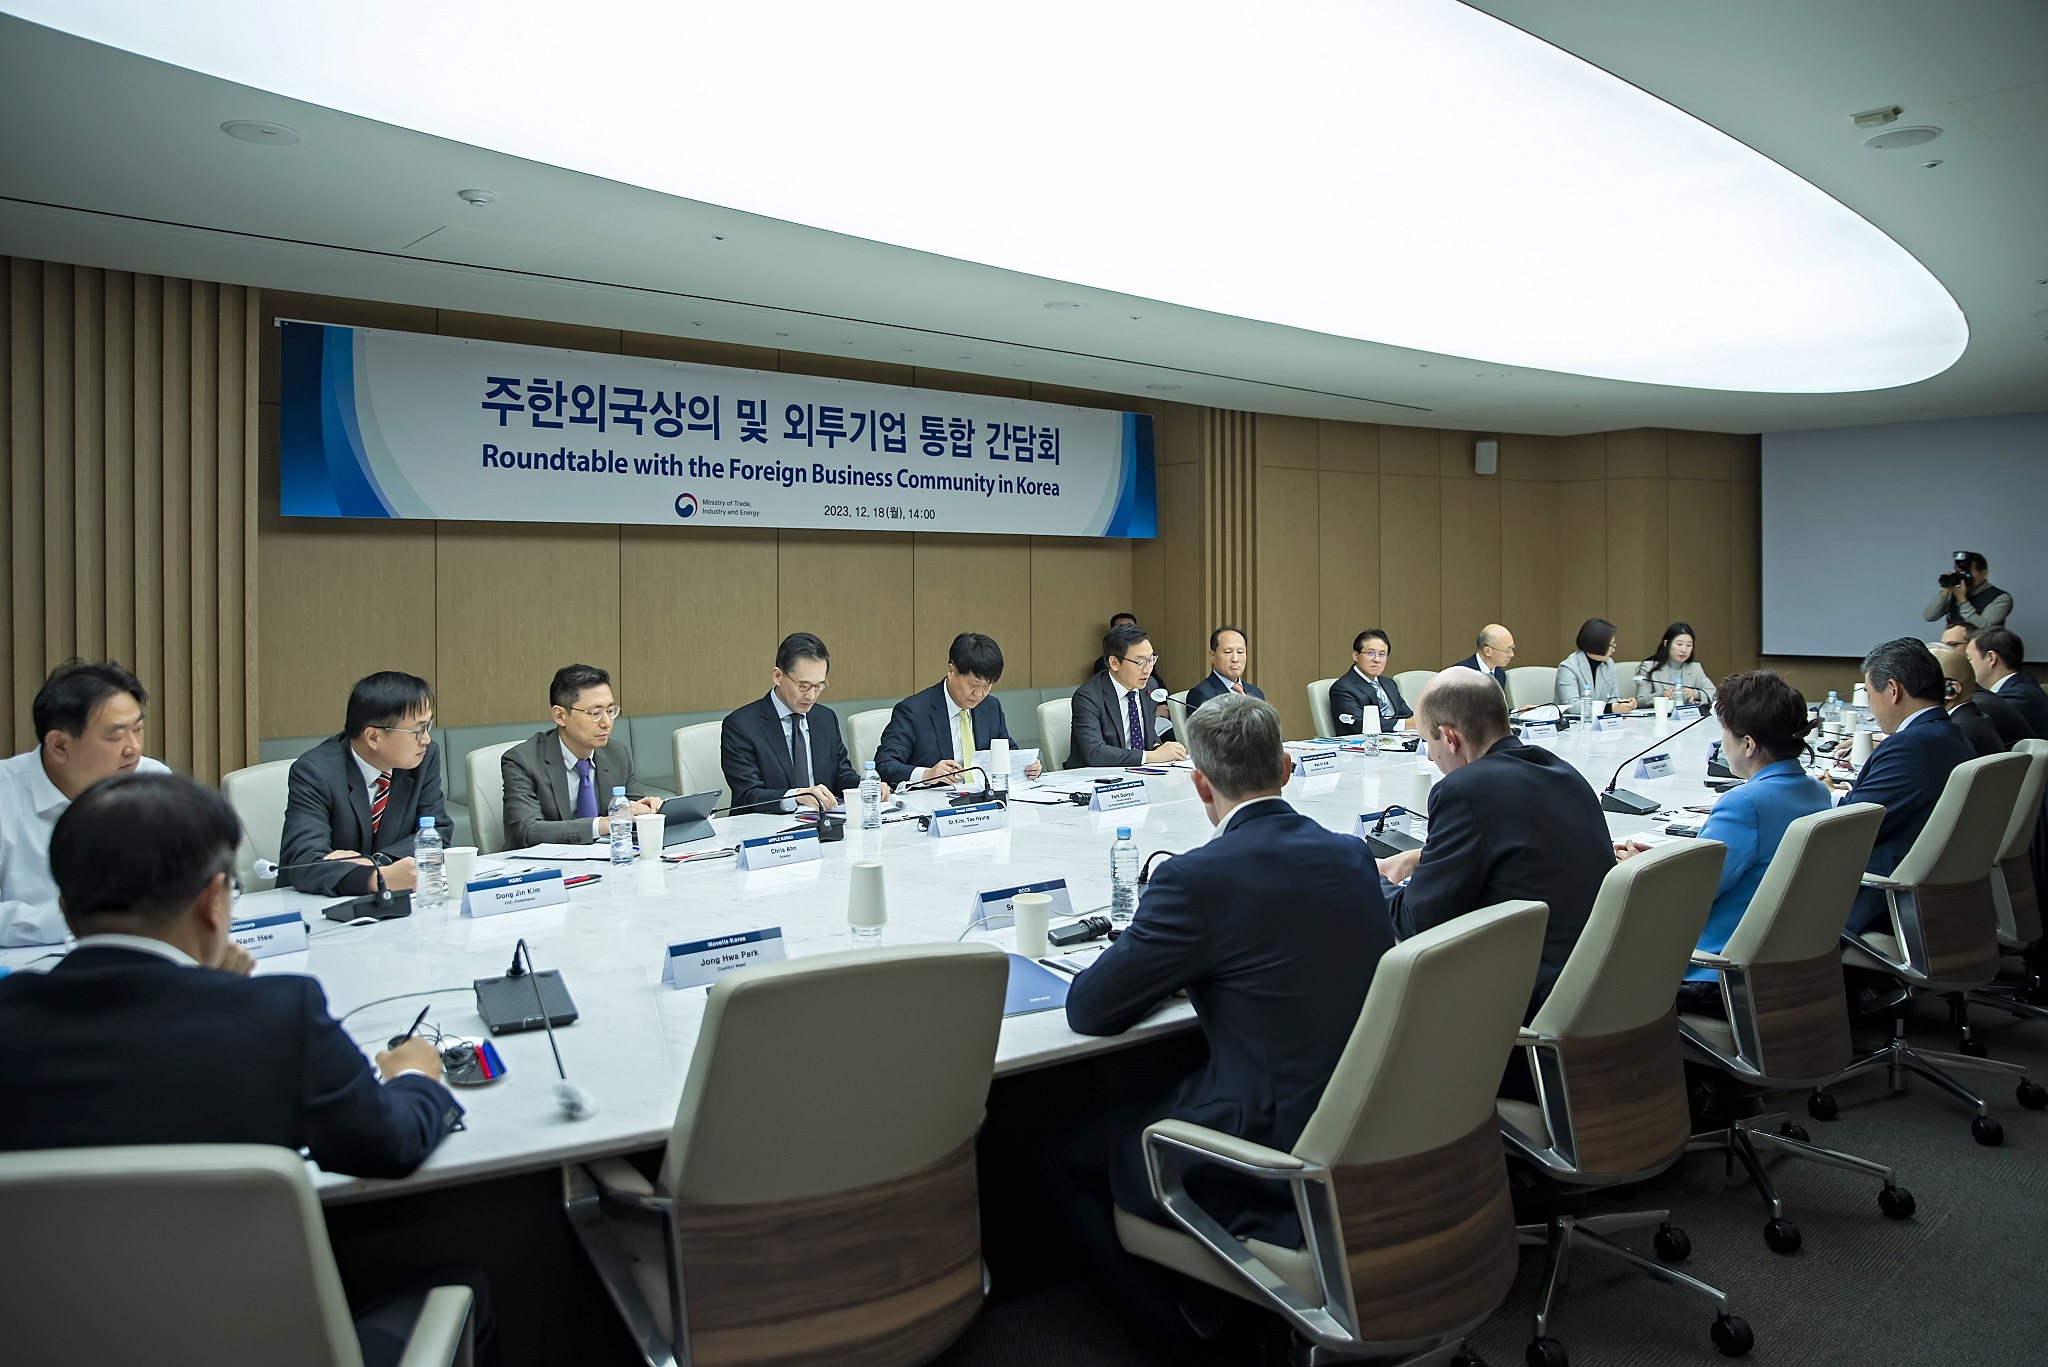 Roundtable with the Foreign Business Community in Korea